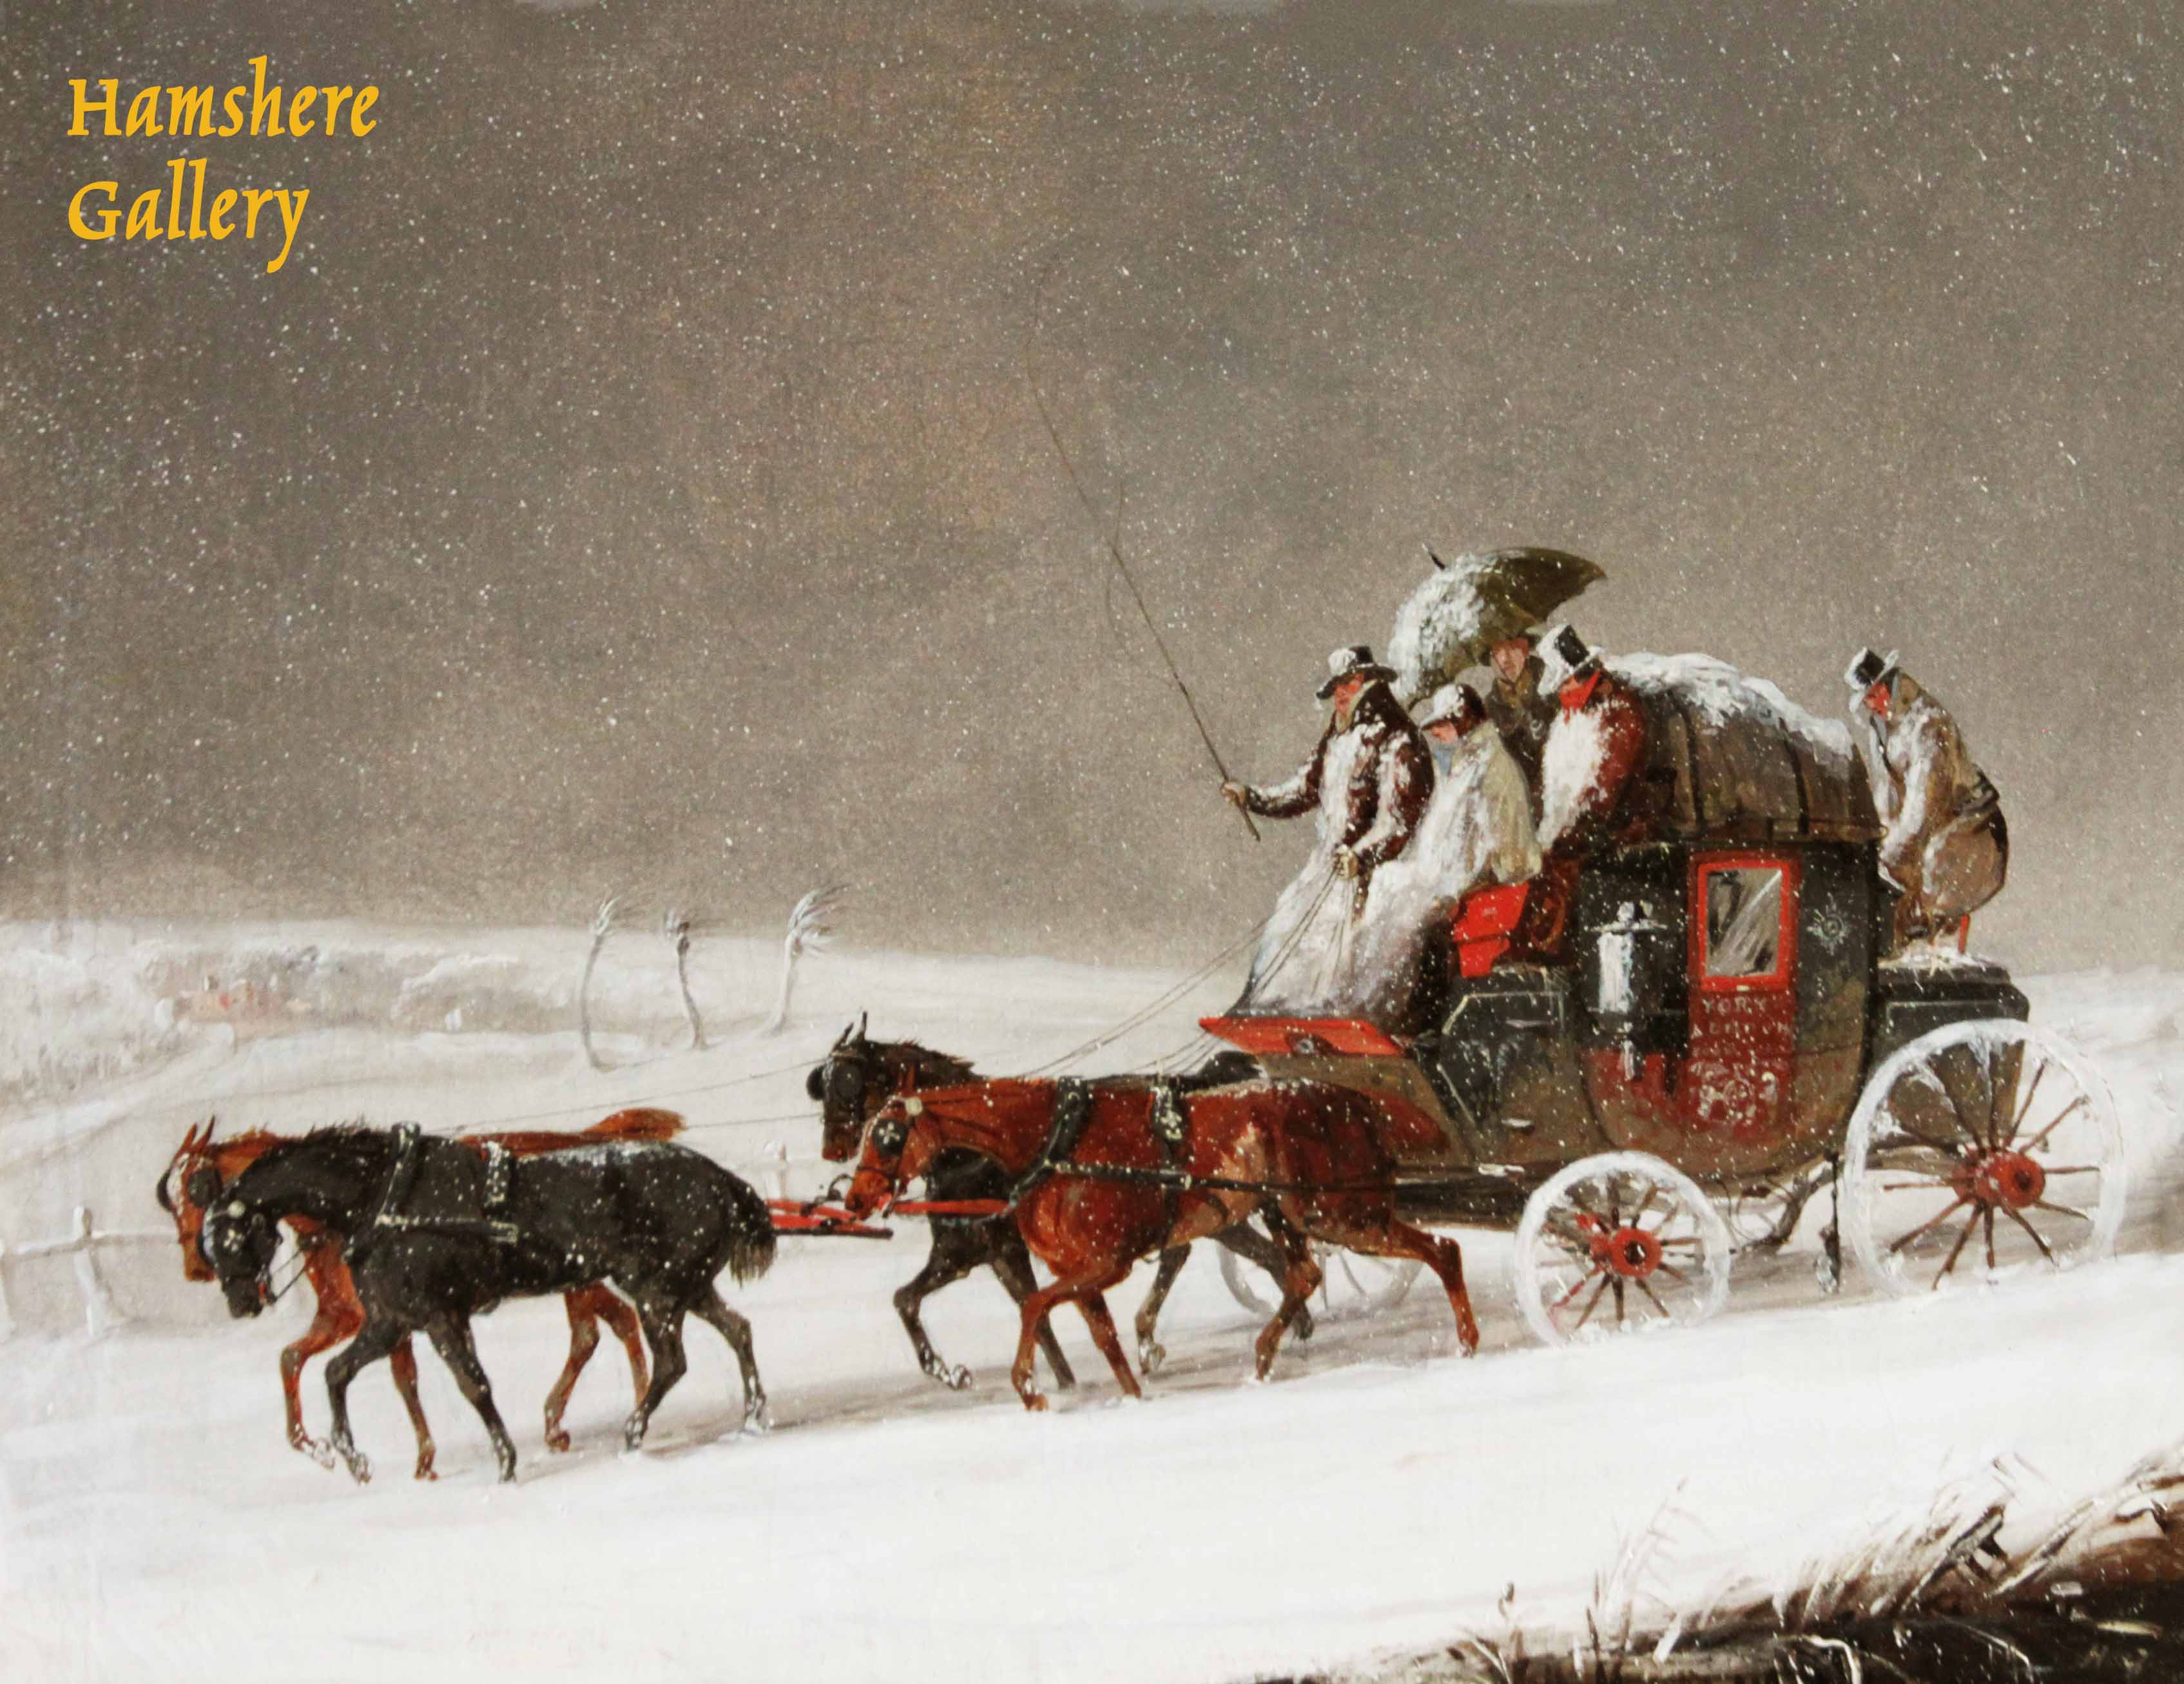 Click to see full size: The York and London Mail in a snowstorm by Henry Thomas Alken Snr web.jpg The York and London Mail in a snowstorm by Henry Thomas Alken Snr. (English, 1785 – 1851). Signed with initials